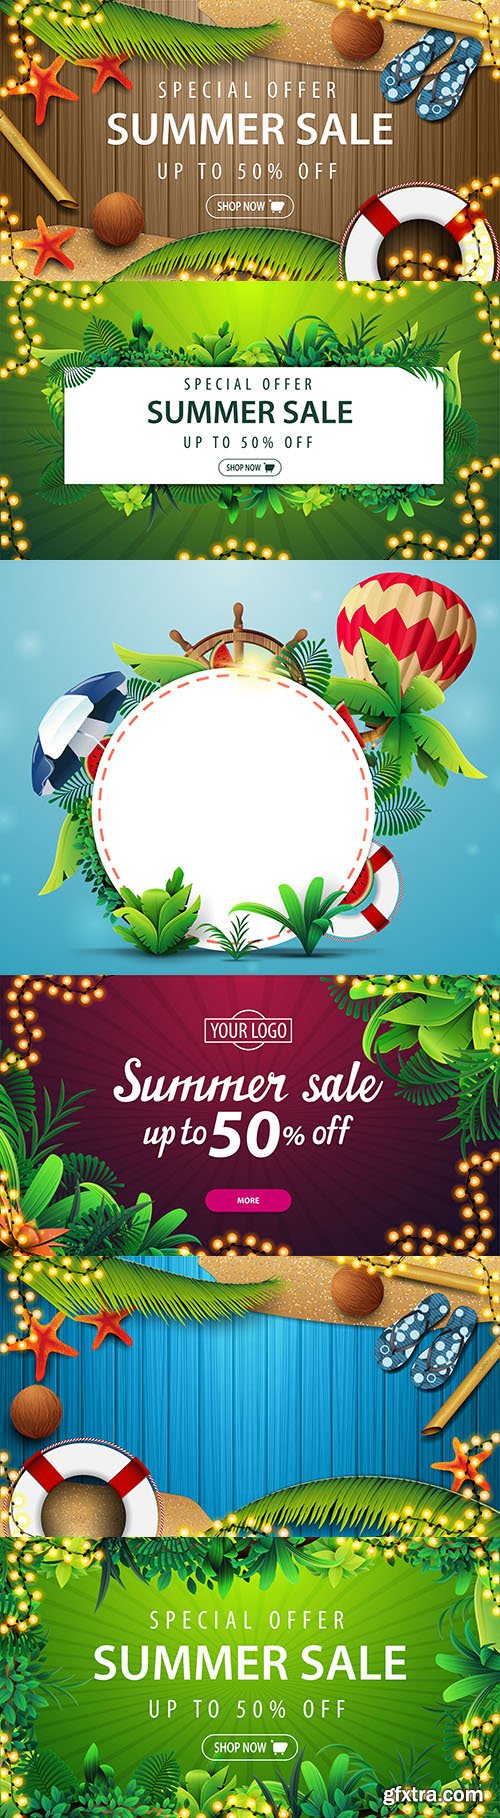 Special offer summer sale discount banner from tropical leaves
